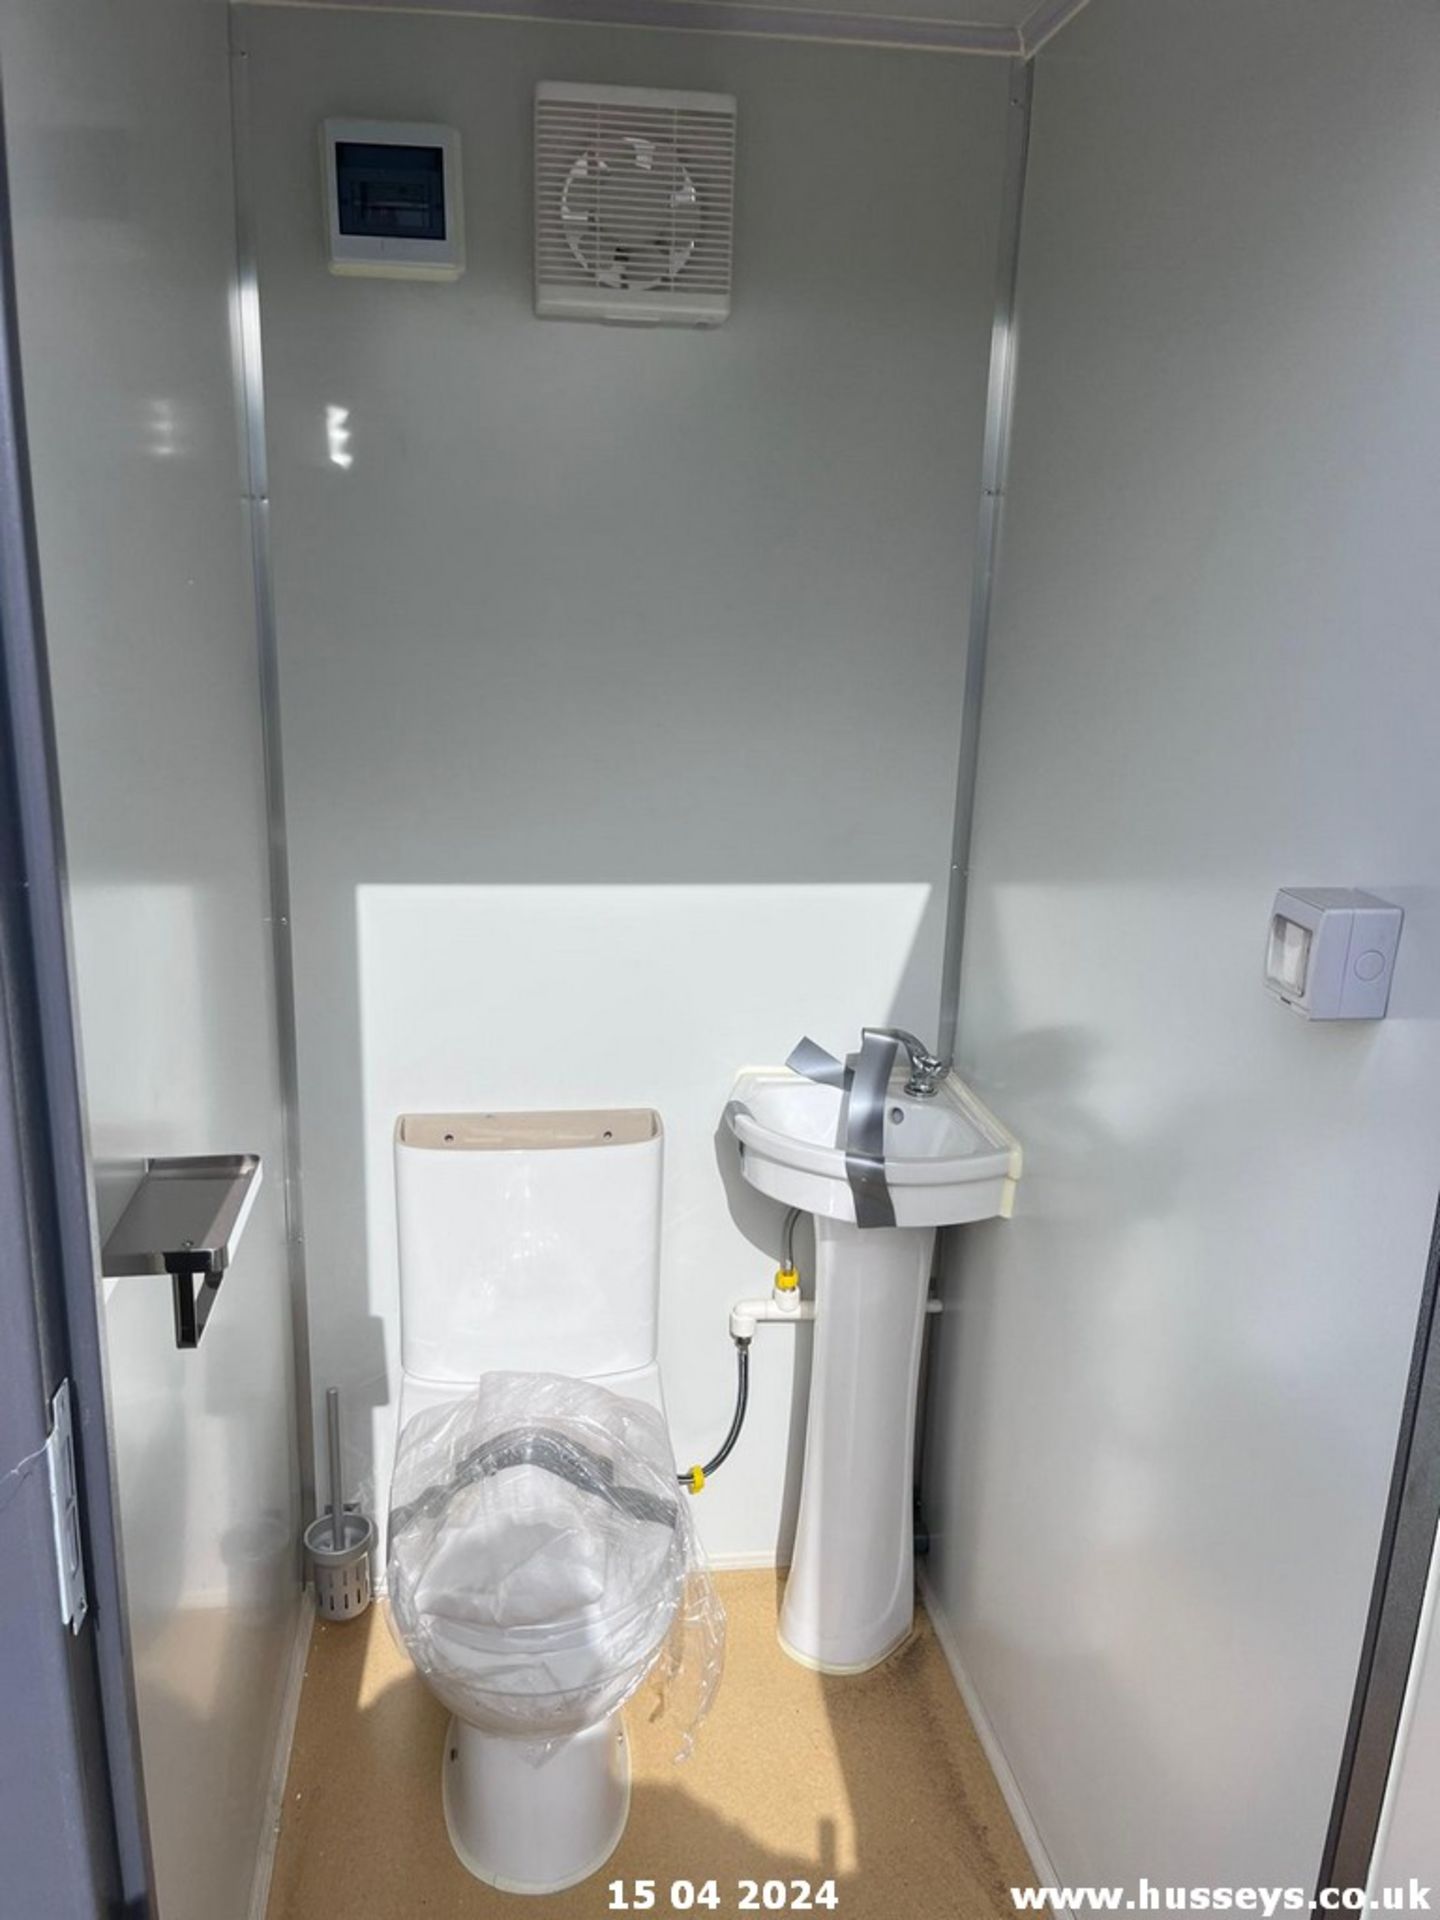 2 PERSON TOILET C.W FORK POCKETS & LIFT EYES 2X WC'S SINKS LIGHTS EXTRACTORS & KEYS - Image 7 of 10